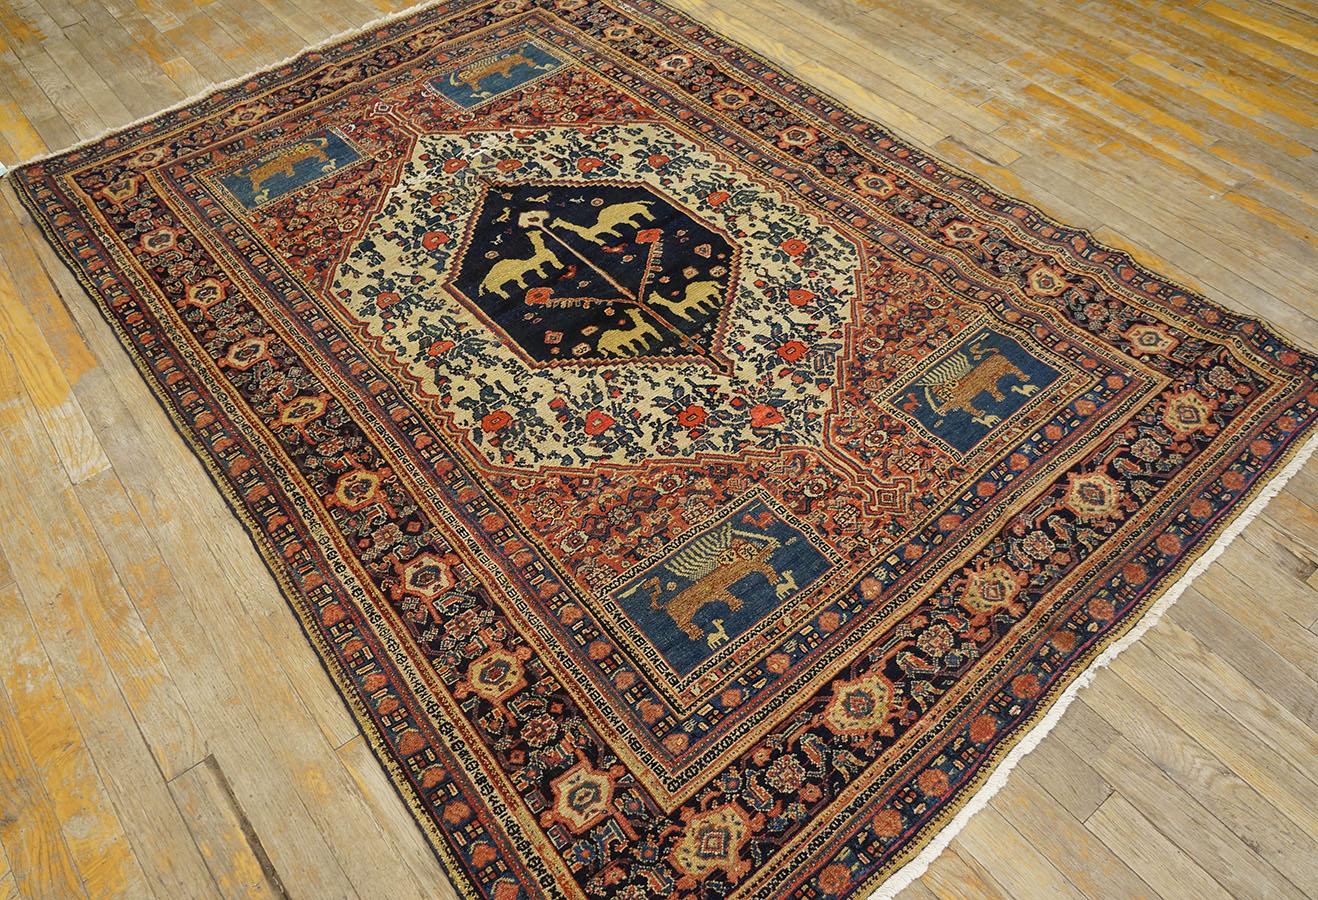  19th Century W. Persian Senneh Carpet with Lions & Camels
( 4'8'' x 6'6'' - 142 x 198 )